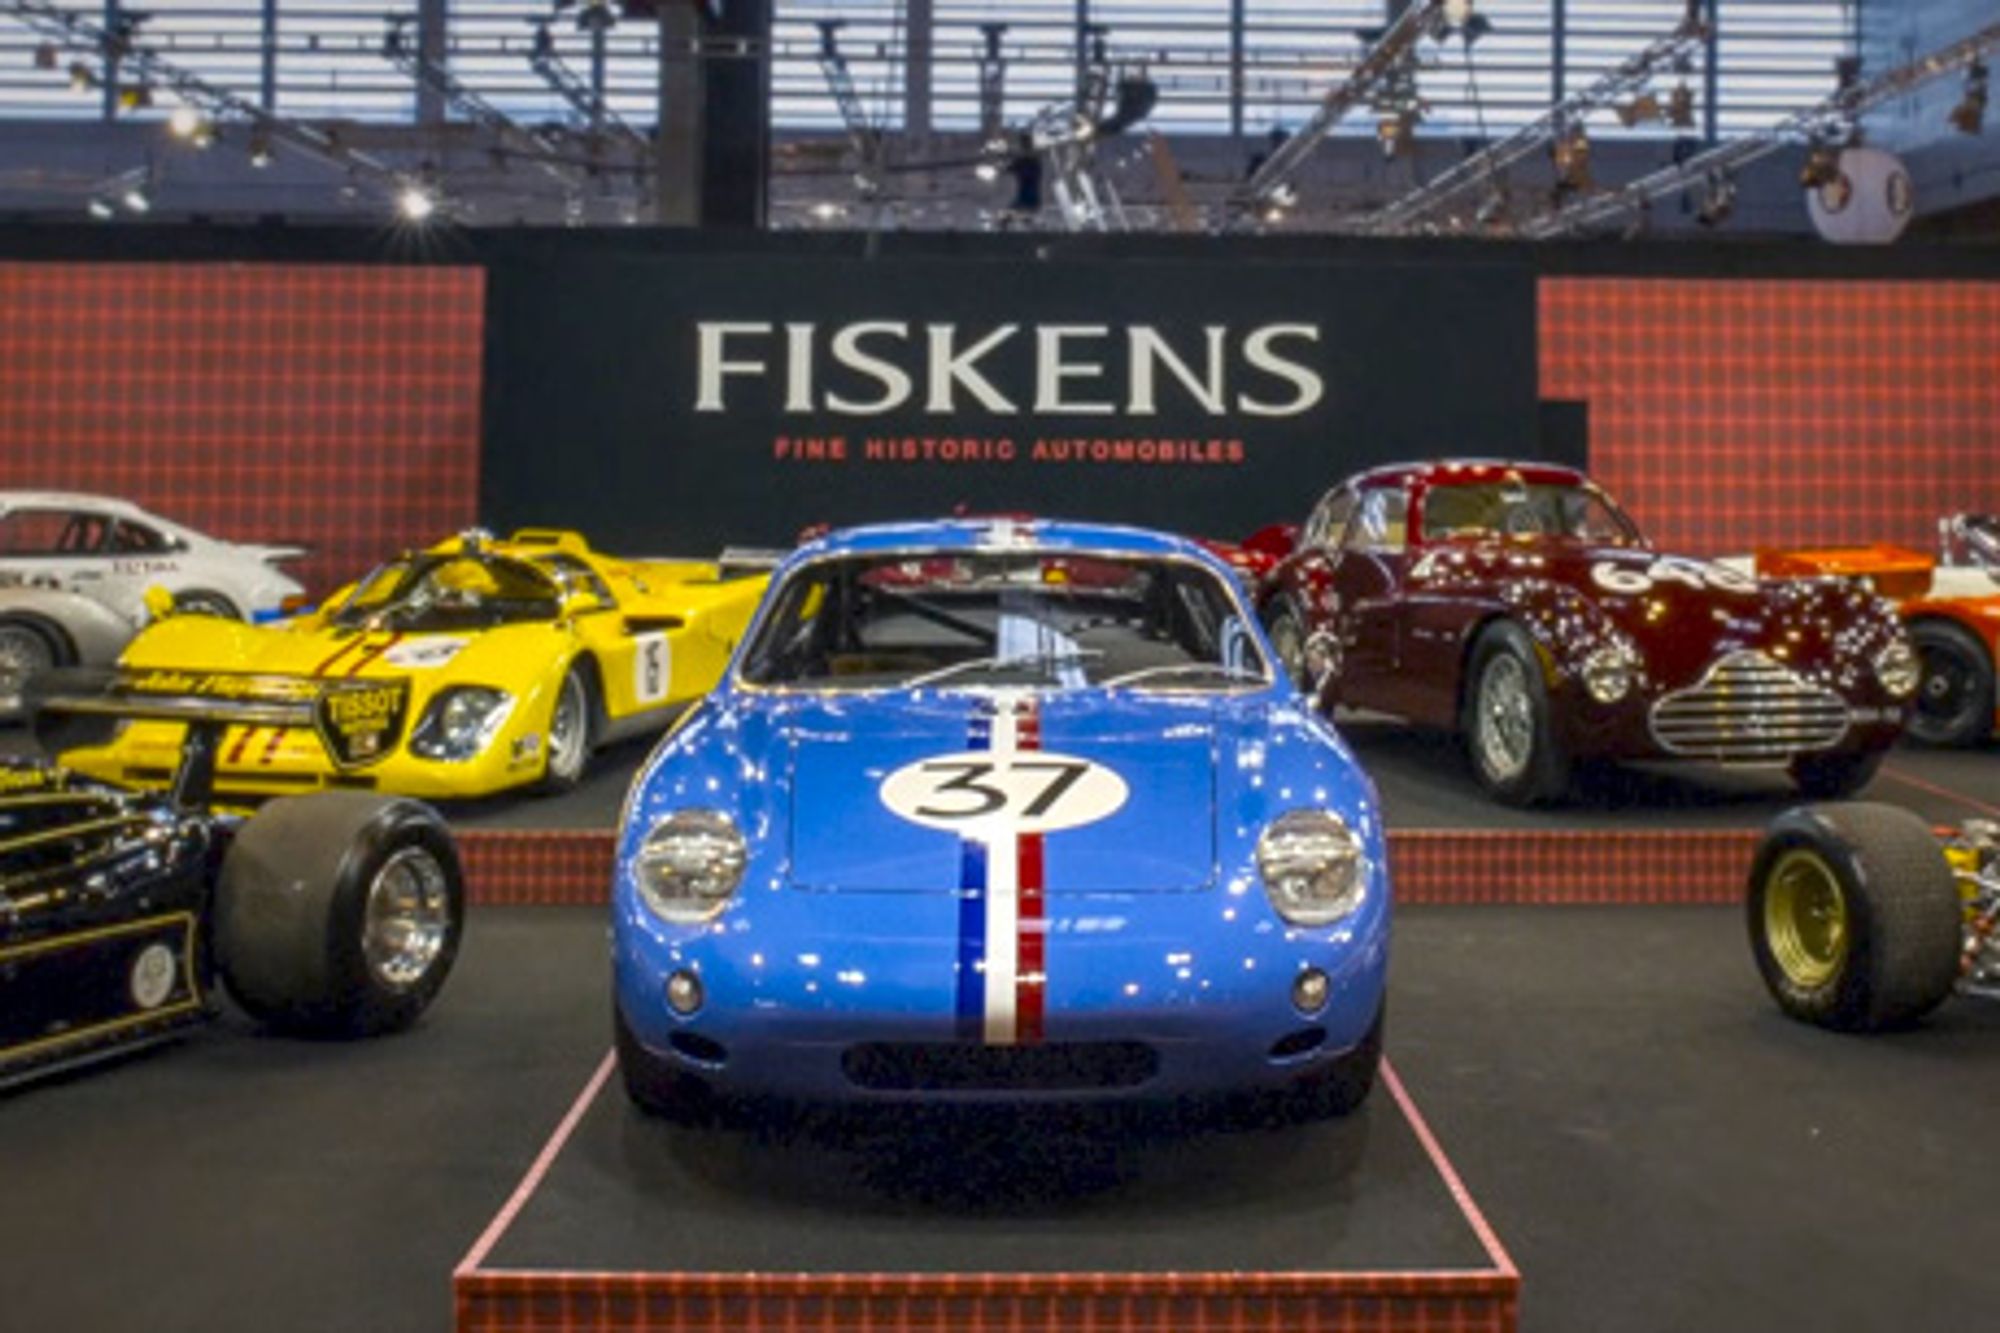 Another stunning display makes Retromobile a resounding success for Fiskens